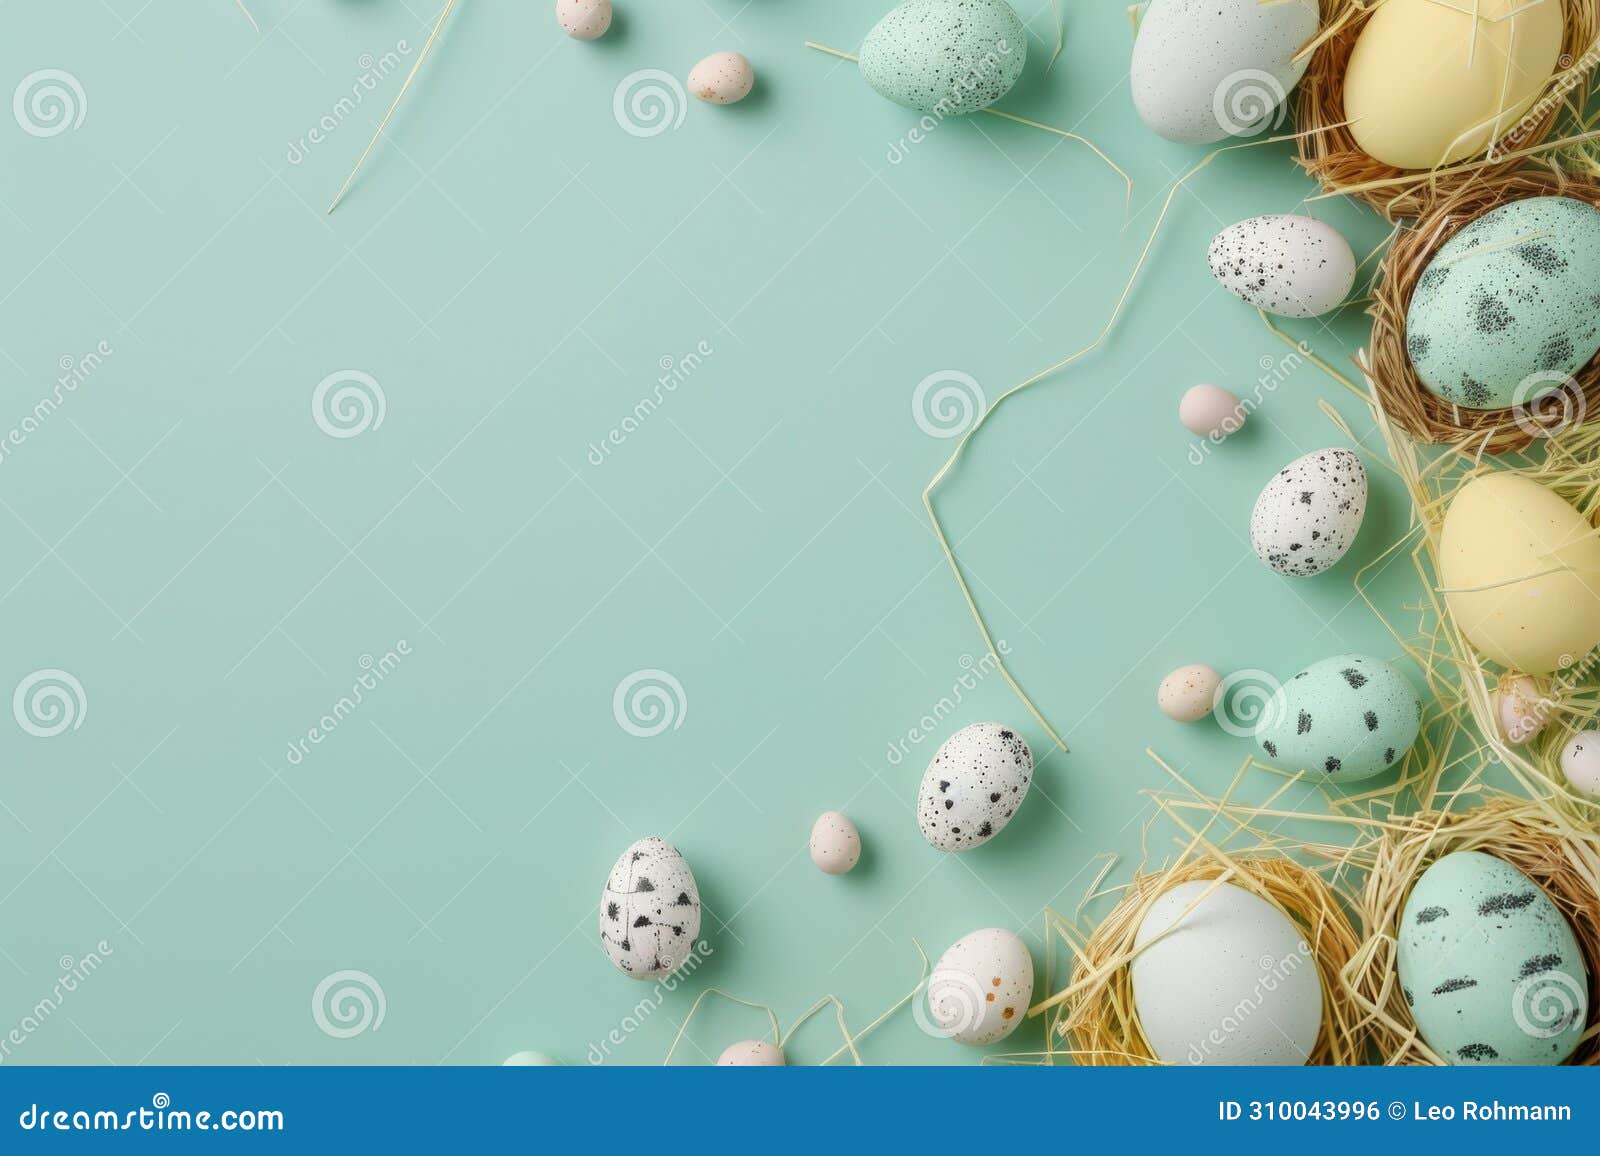 happy easter crimson red eggs entertaining basket. white crucifix bunny turquoise lagoon. ideograph background wallpaper